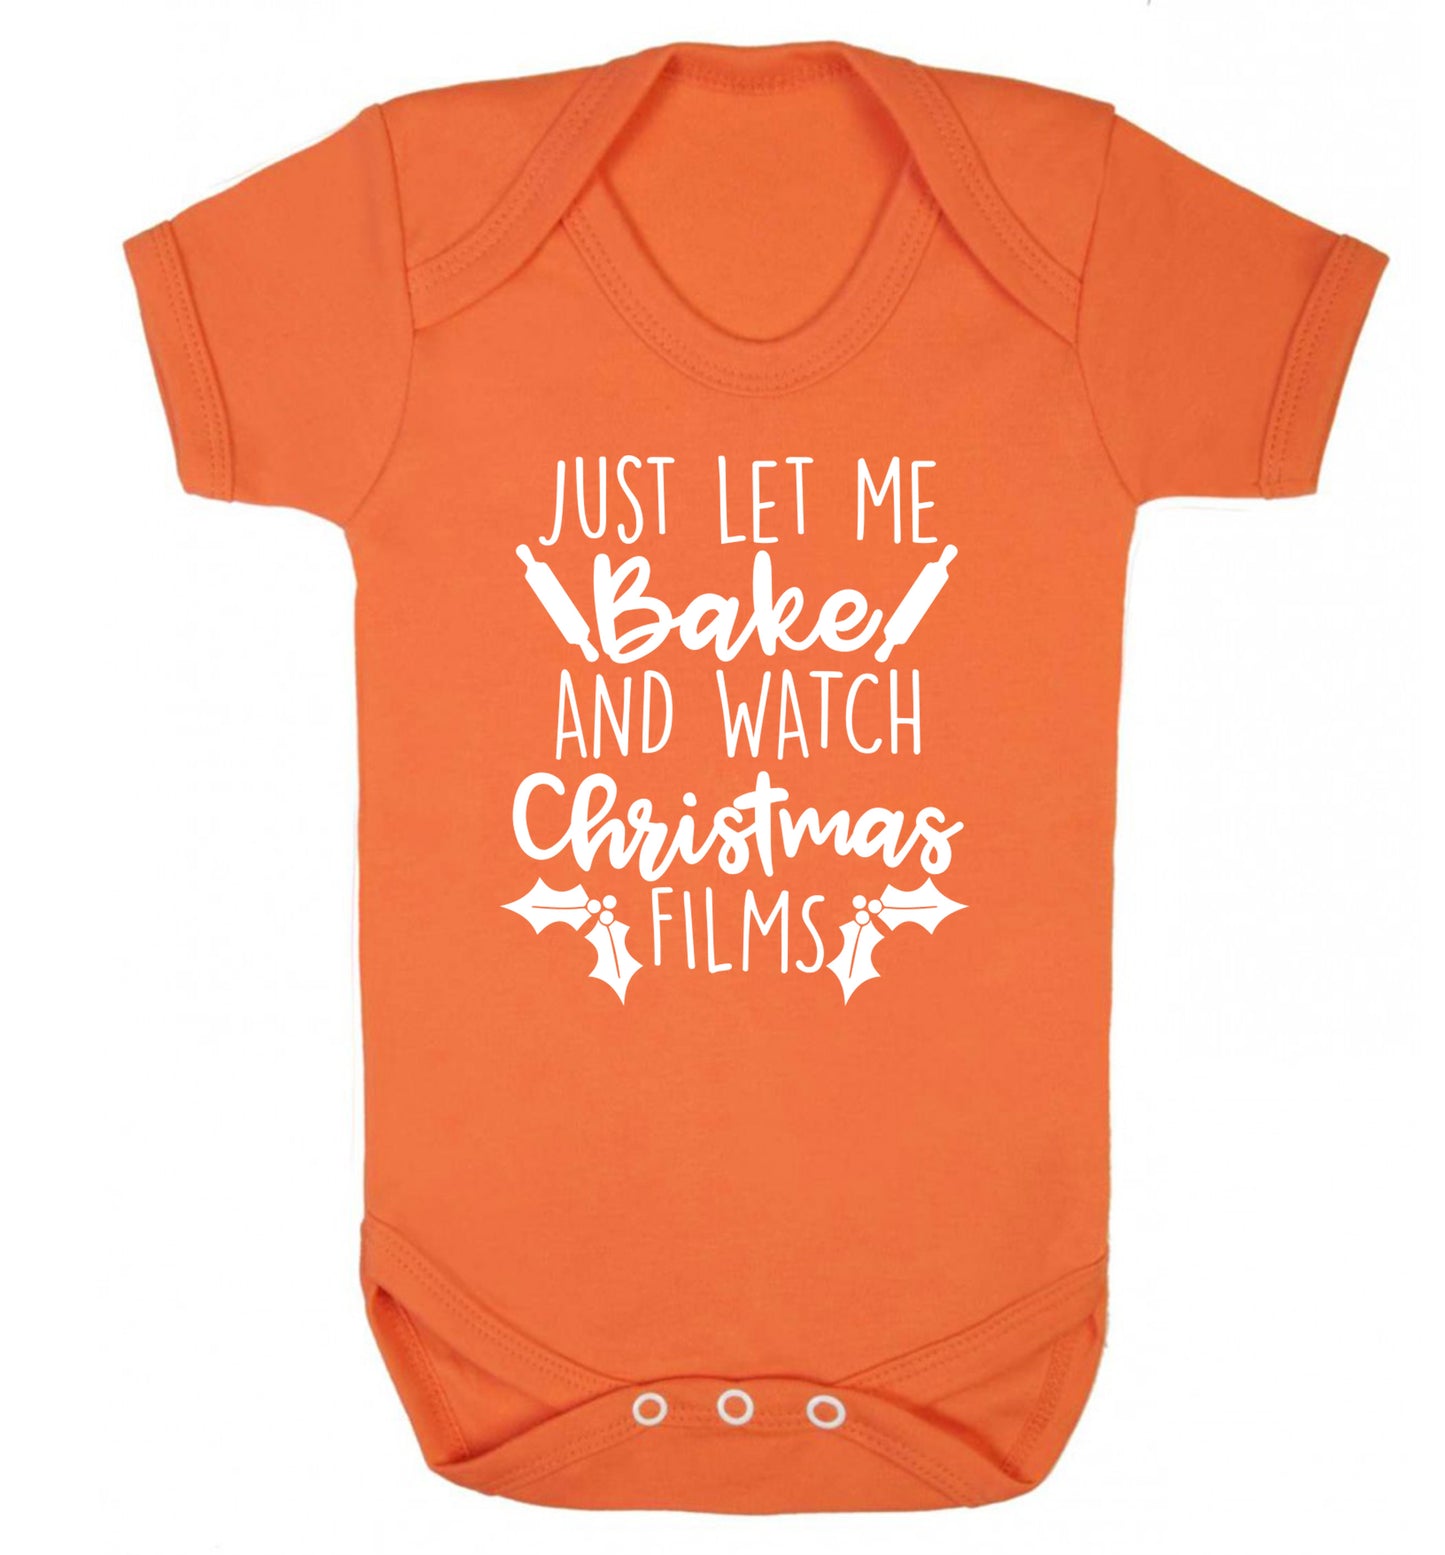 Just let me bake and watch Christmas films Baby Vest orange 18-24 months